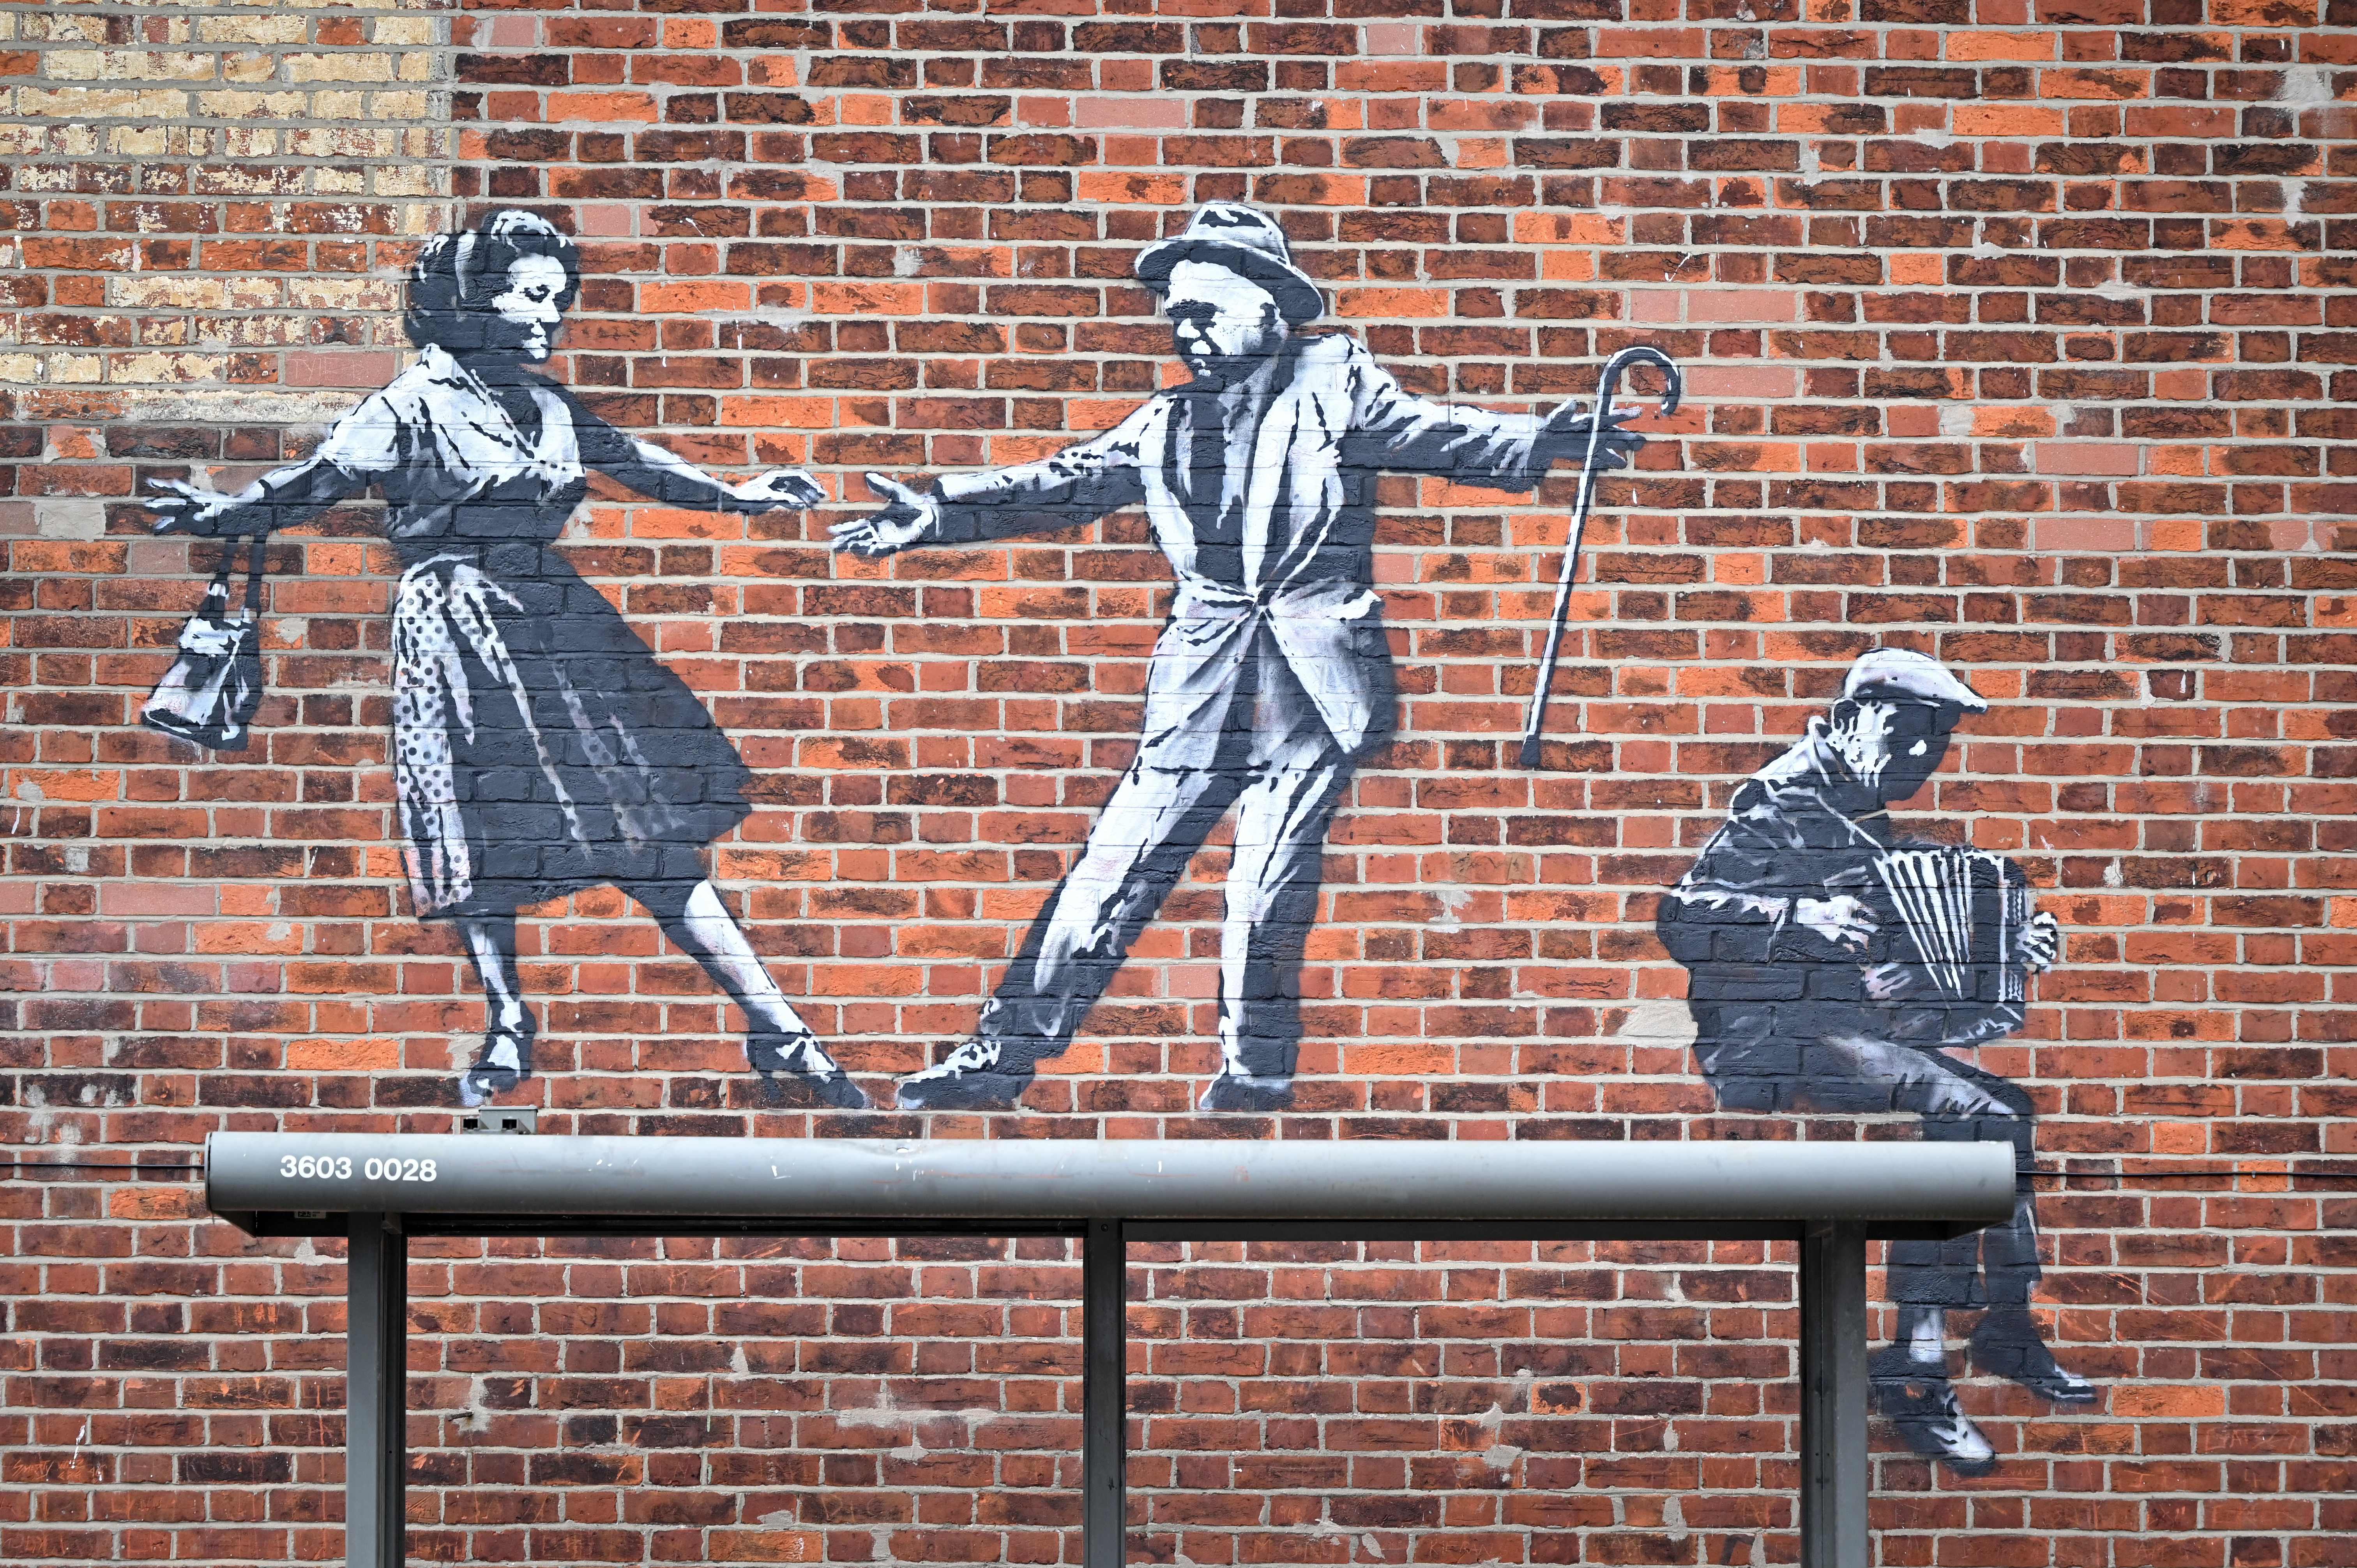 A public work by Banksy, the globally famous street artist from Bristol